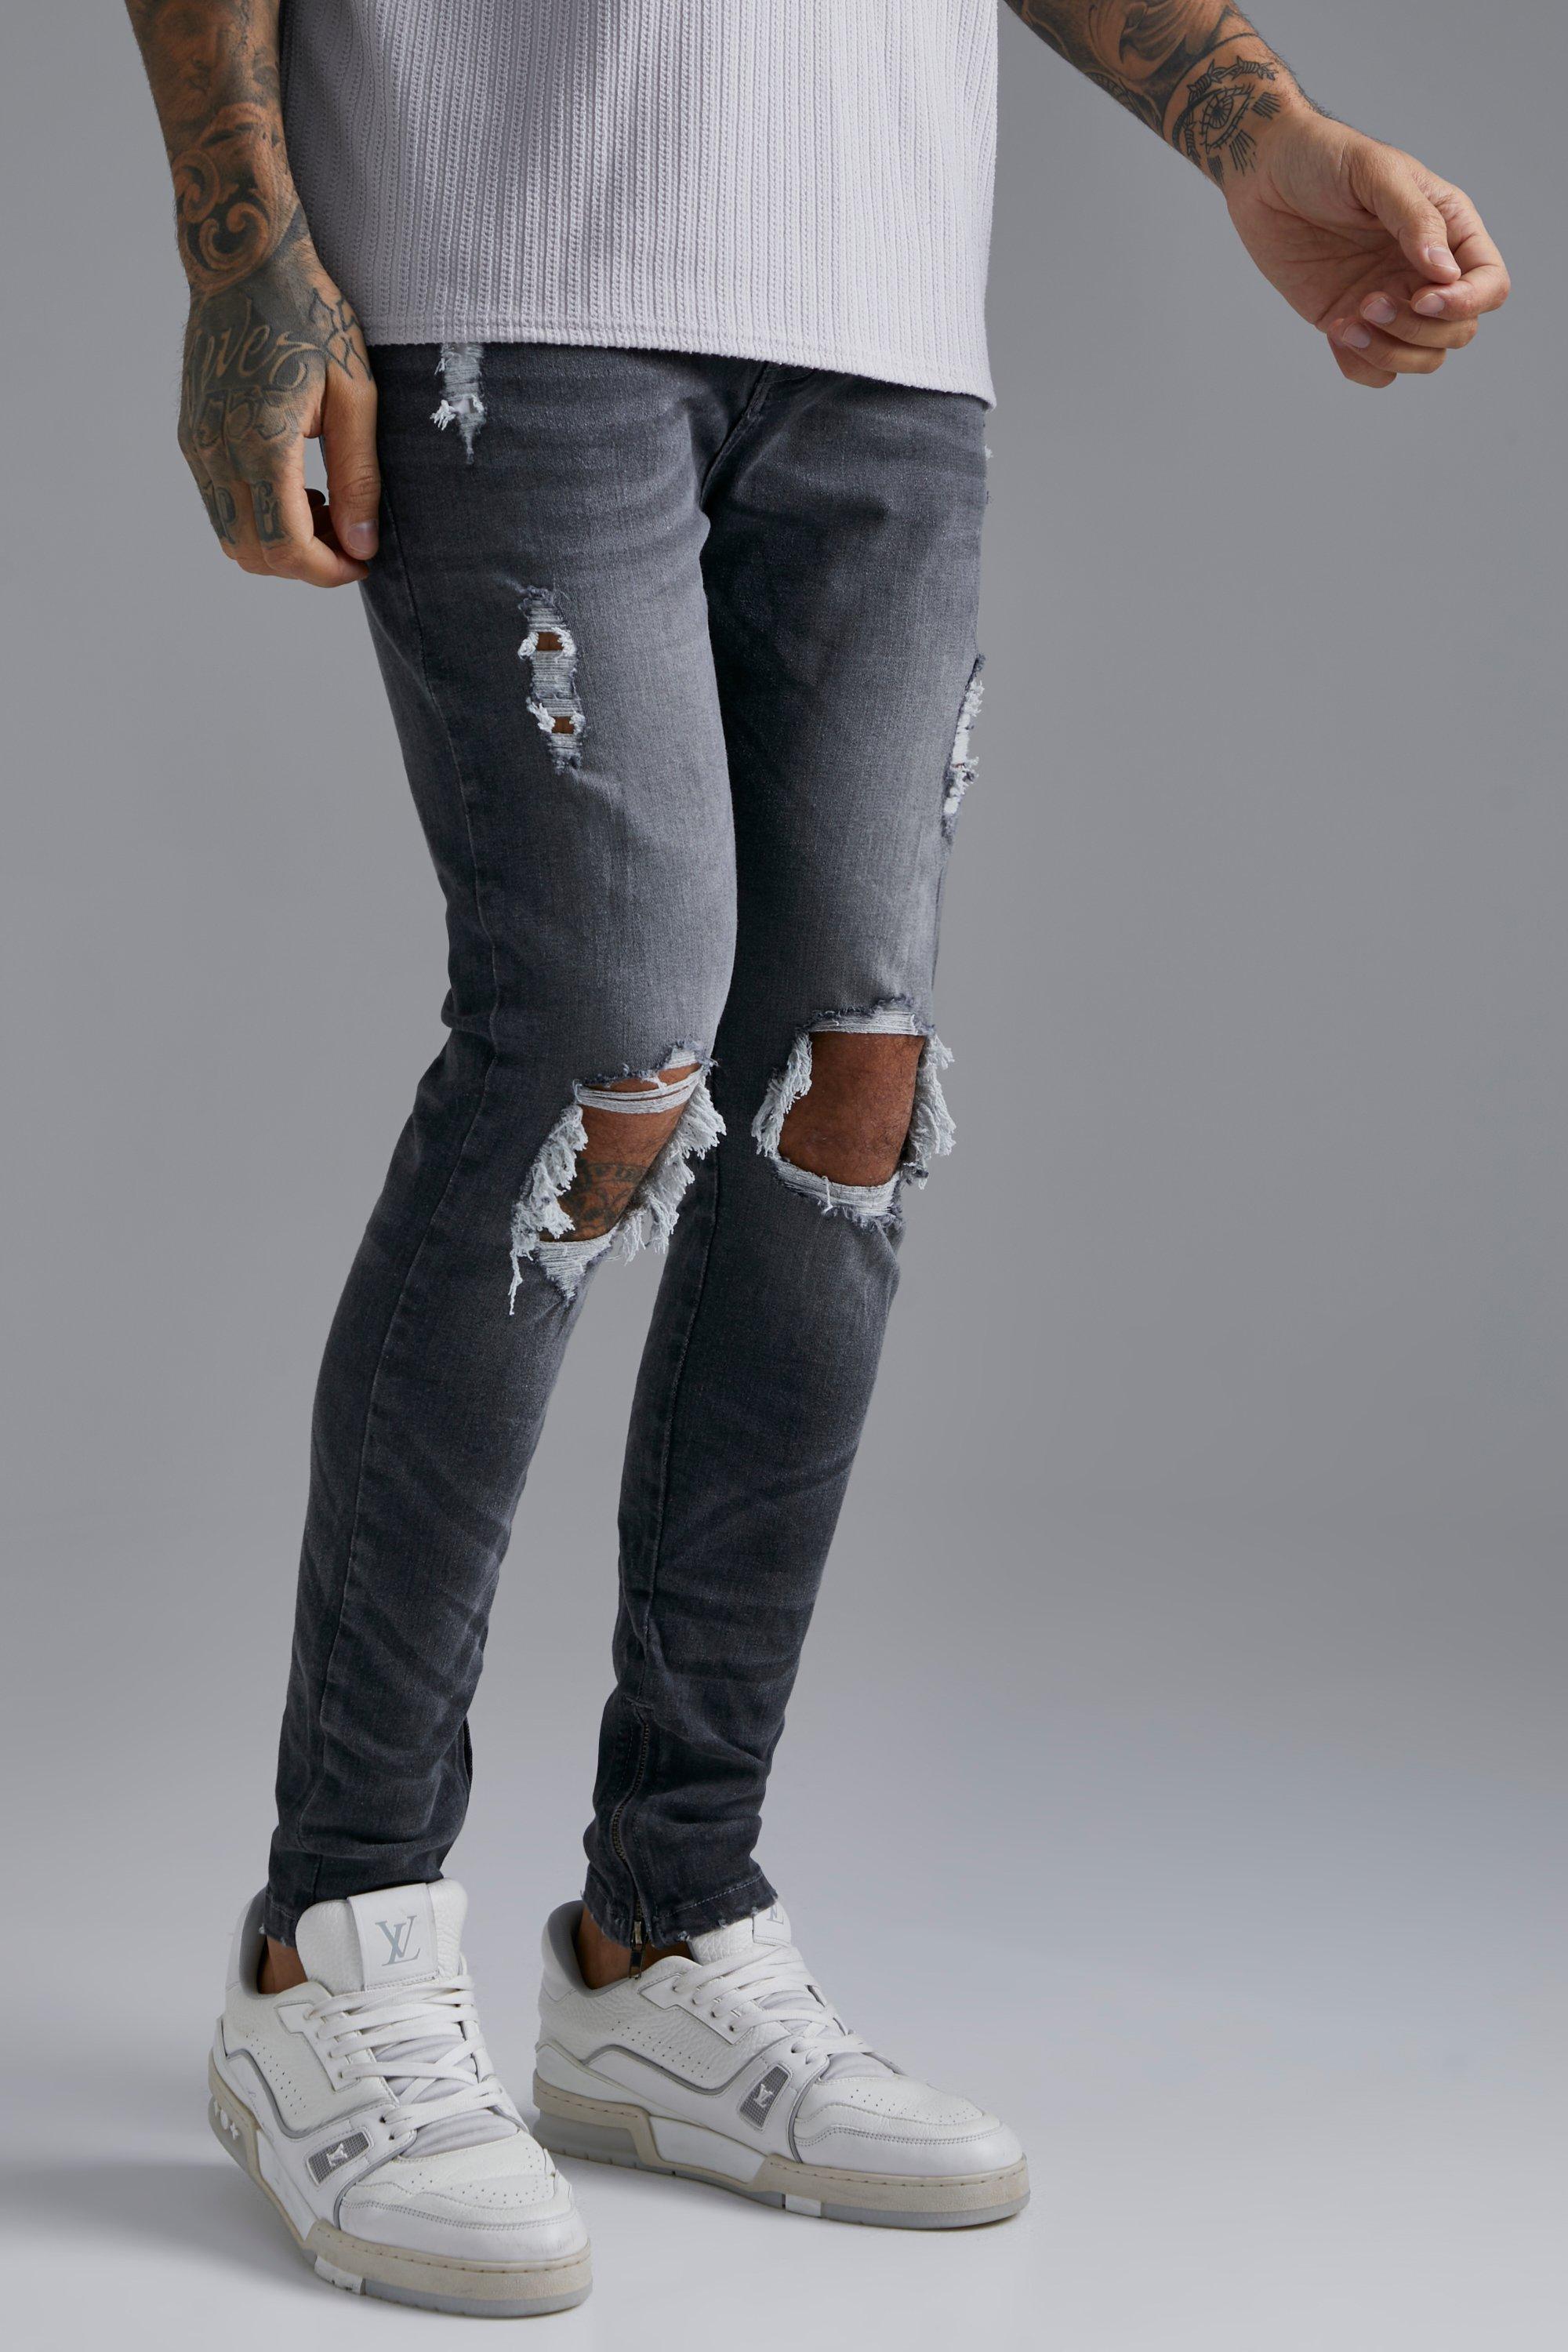 Boohoo Skinny Stretch Knee Rip Jeans With Zips in Gray | Lyst